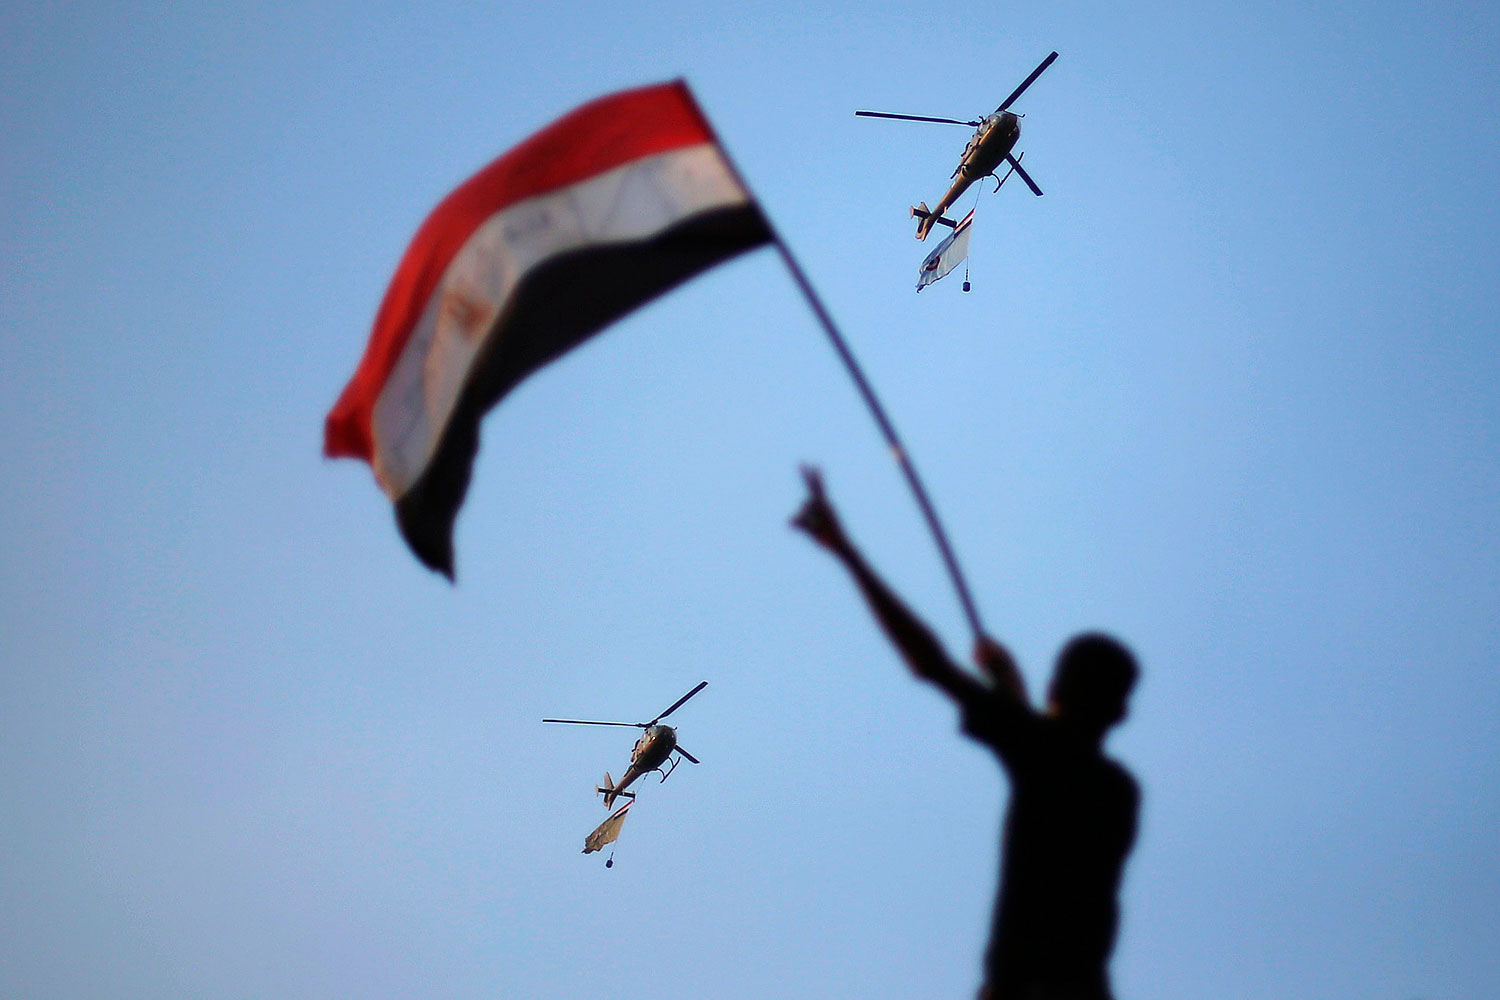 July 1, 2013. Egyptian military helicopters trailing national flags circled over Tahrir Square during a protest demanding that Egyptian President Mohamed Morsi resign in Cairo.